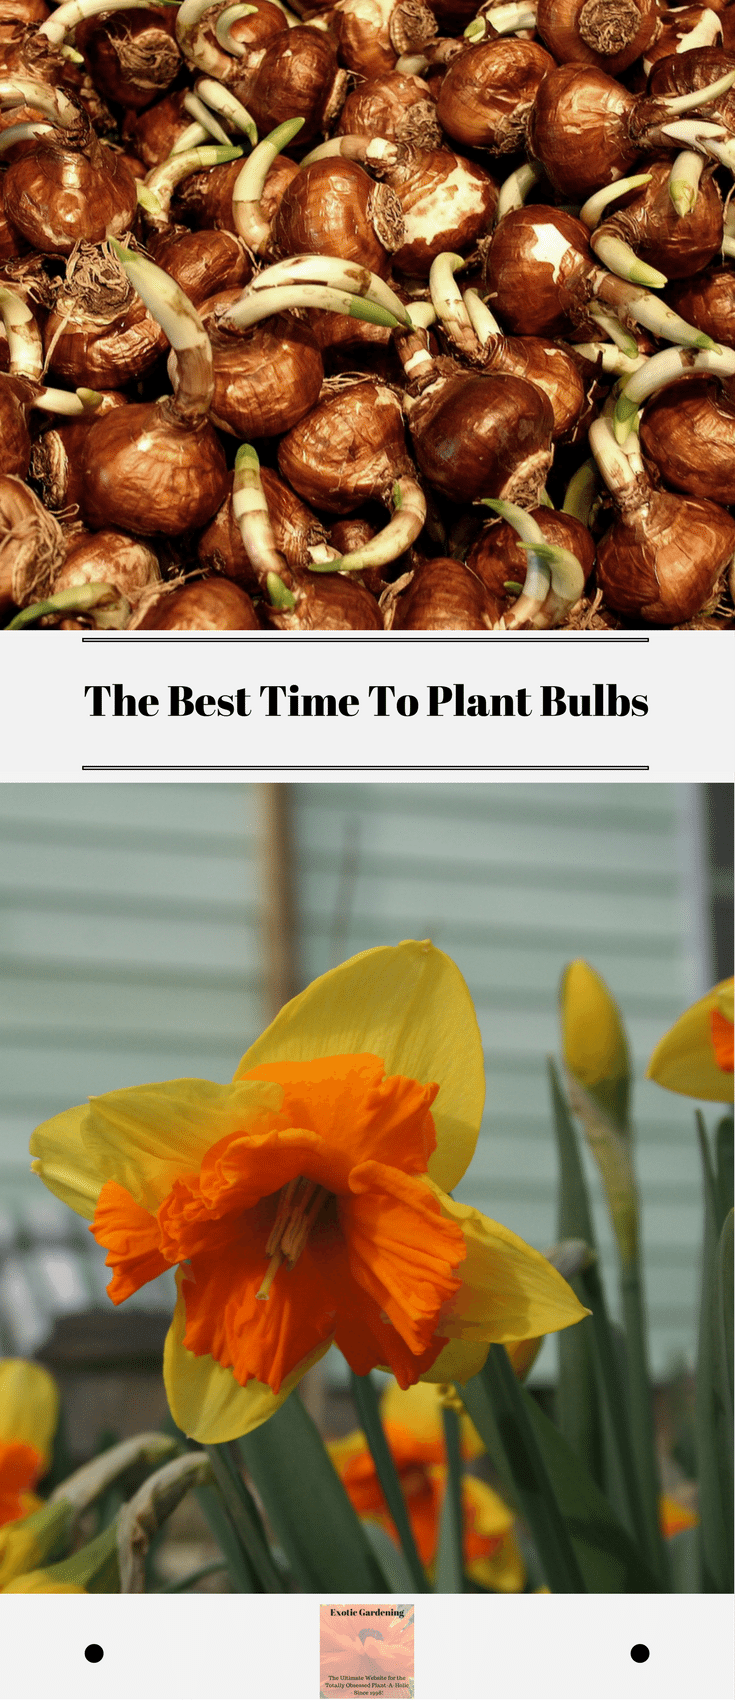 The Best Time To Plant Bulbs